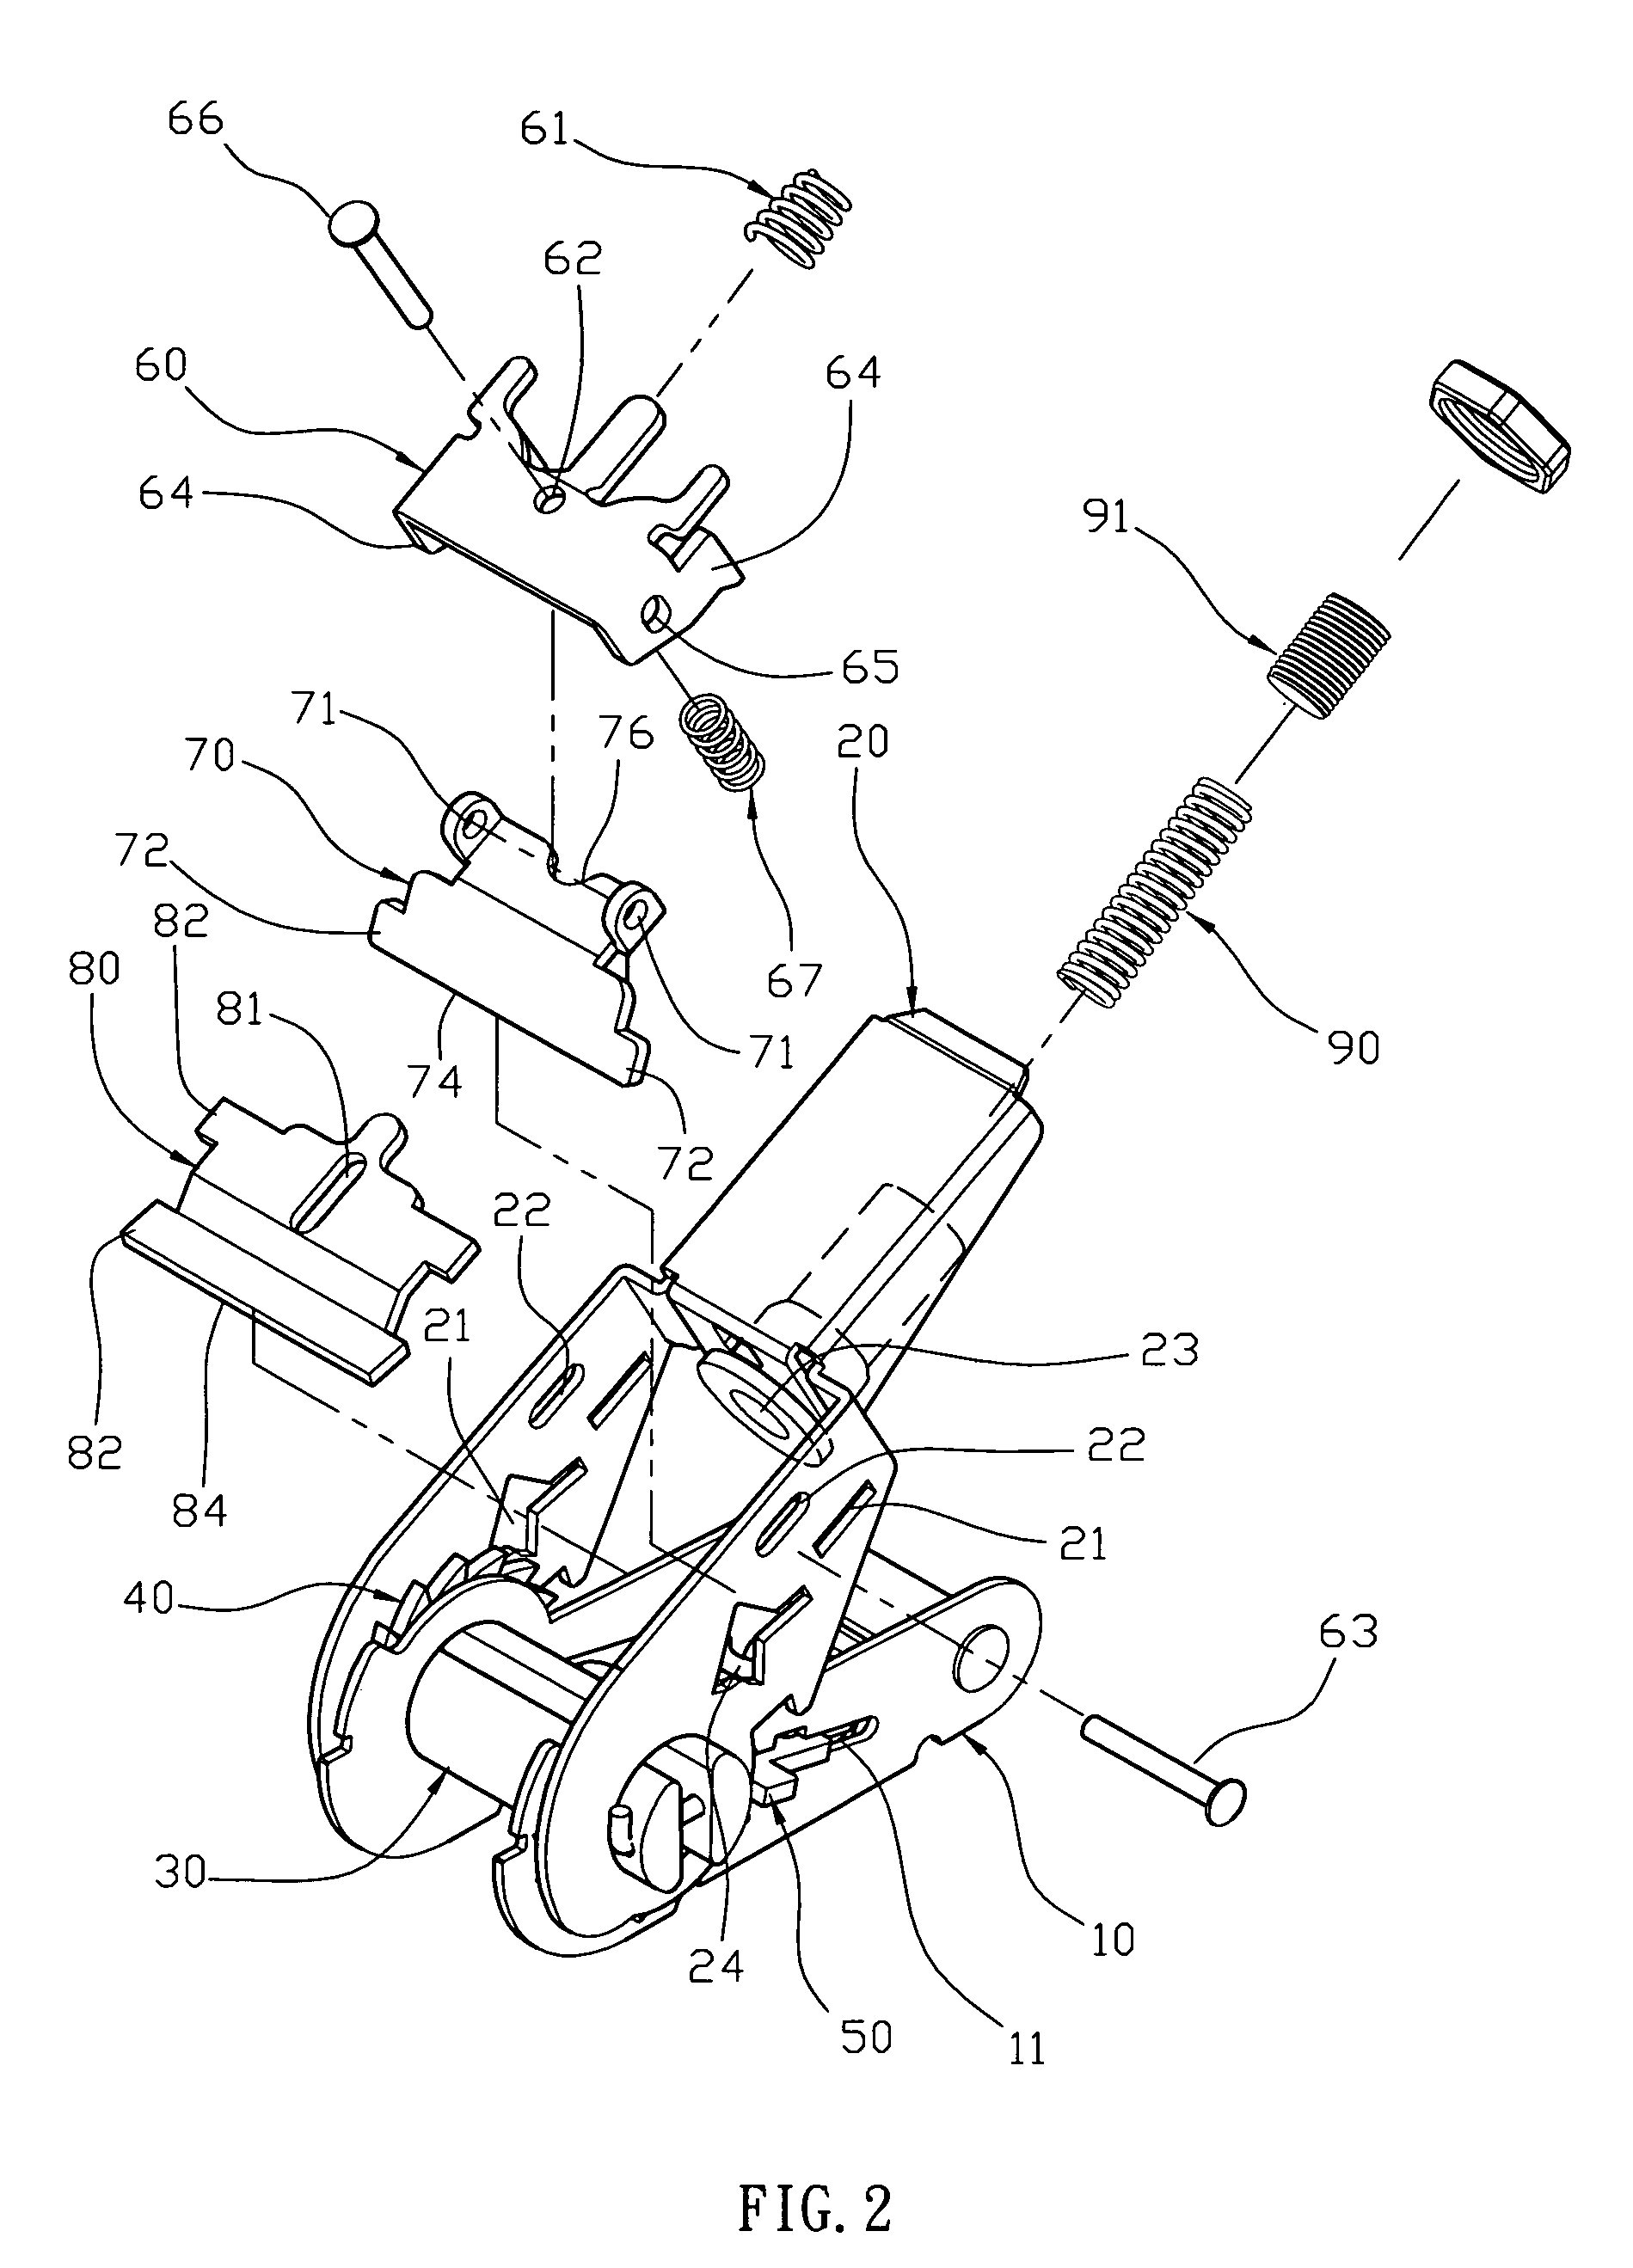 Cable tension device having a tension adjustable function